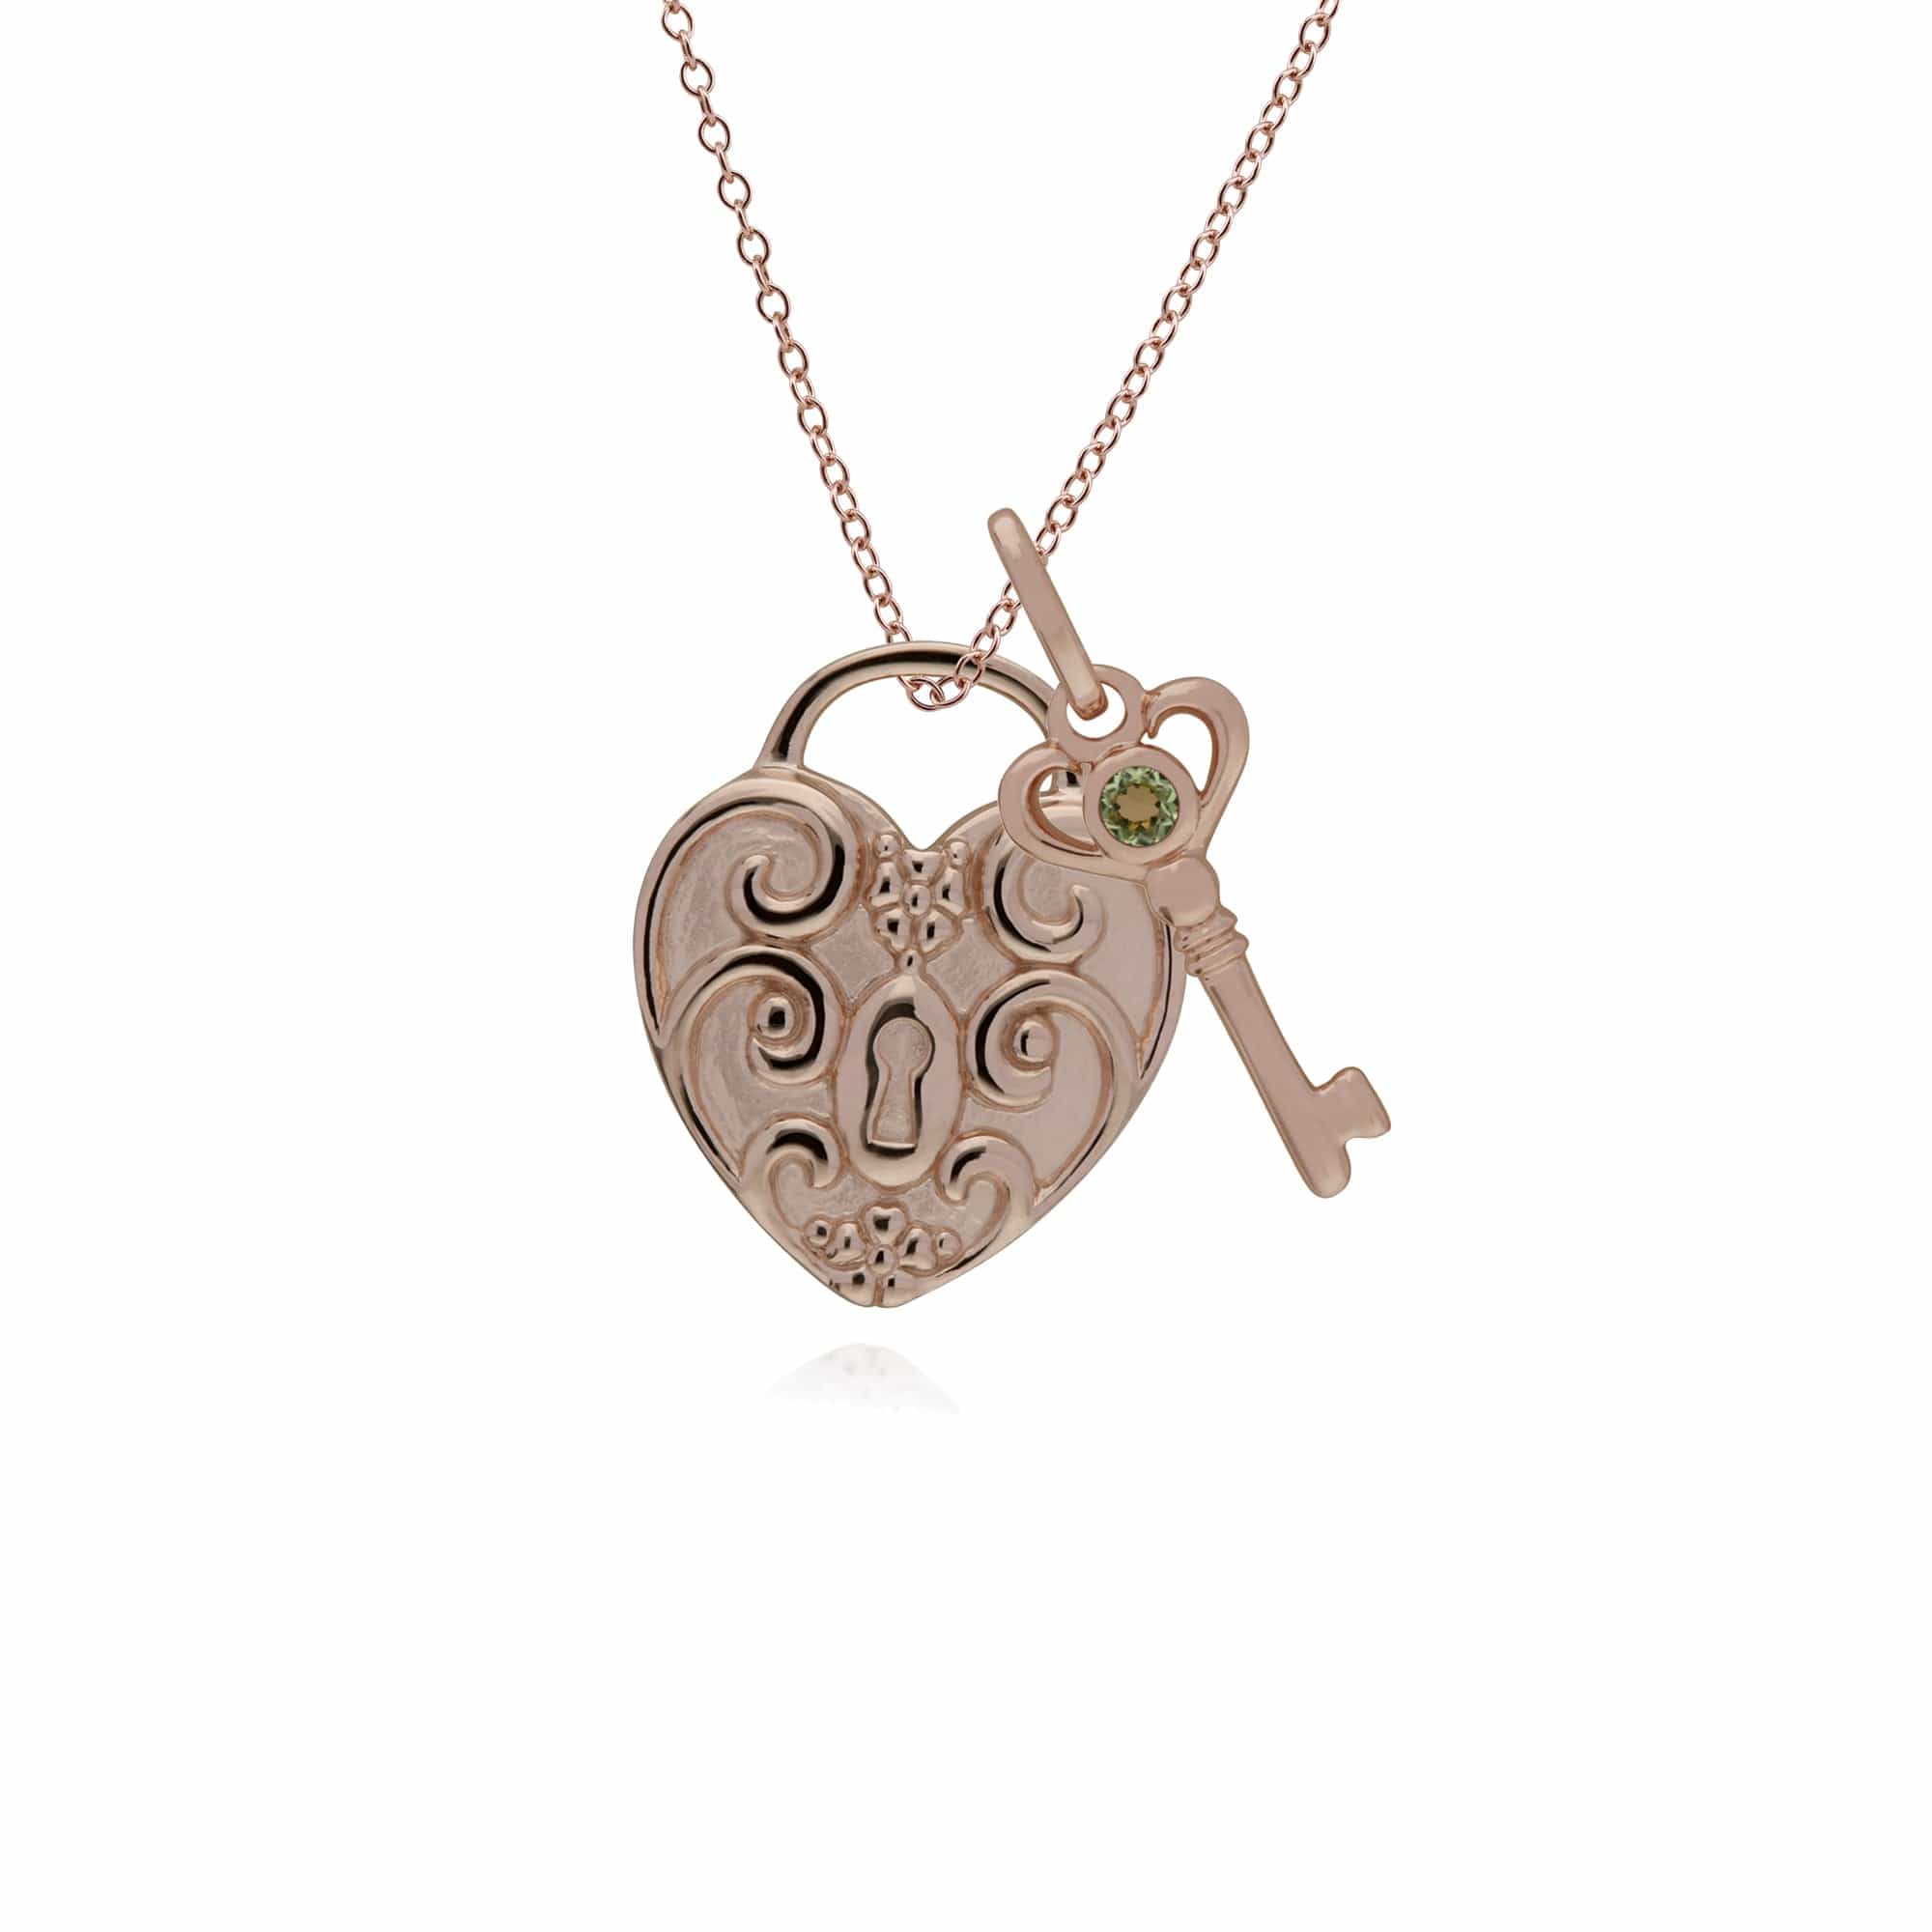 270P026307925-270P026501925 Classic Swirl Heart Lock Pendant & Peridot Key Charm in Rose Gold Plated 925 Sterling Silver 1